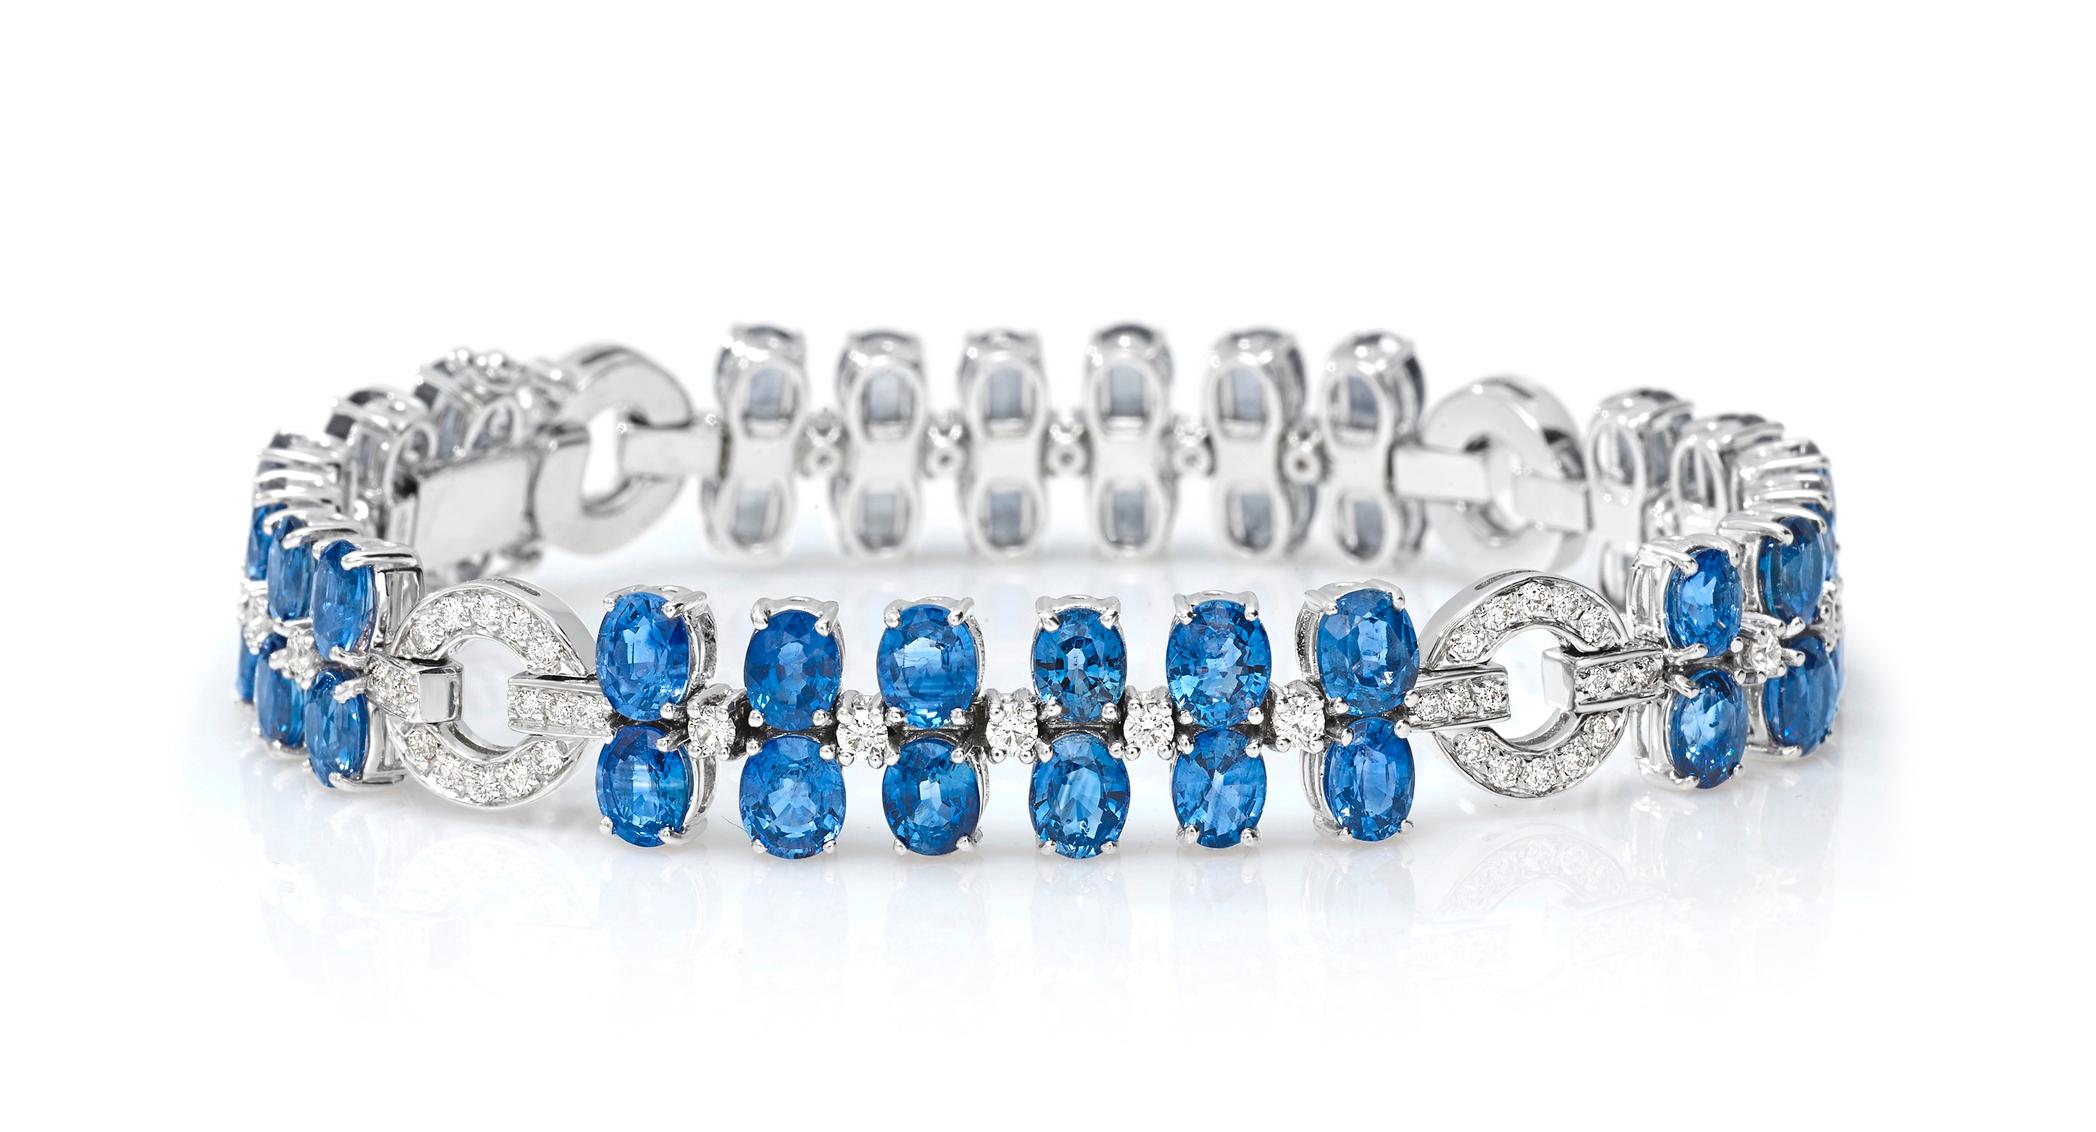 18 Karat White Gold Diamond and Sapphire Bracelet

84 Diamonds 1.27Carat H SI
48 Saphire 23.62 Carat



Founded in 1974, Gianni Lazzaro is a family-owned jewelry company based out of Düsseldorf, Germany.
Although rooted in Germany, Gianni Lazzaro's